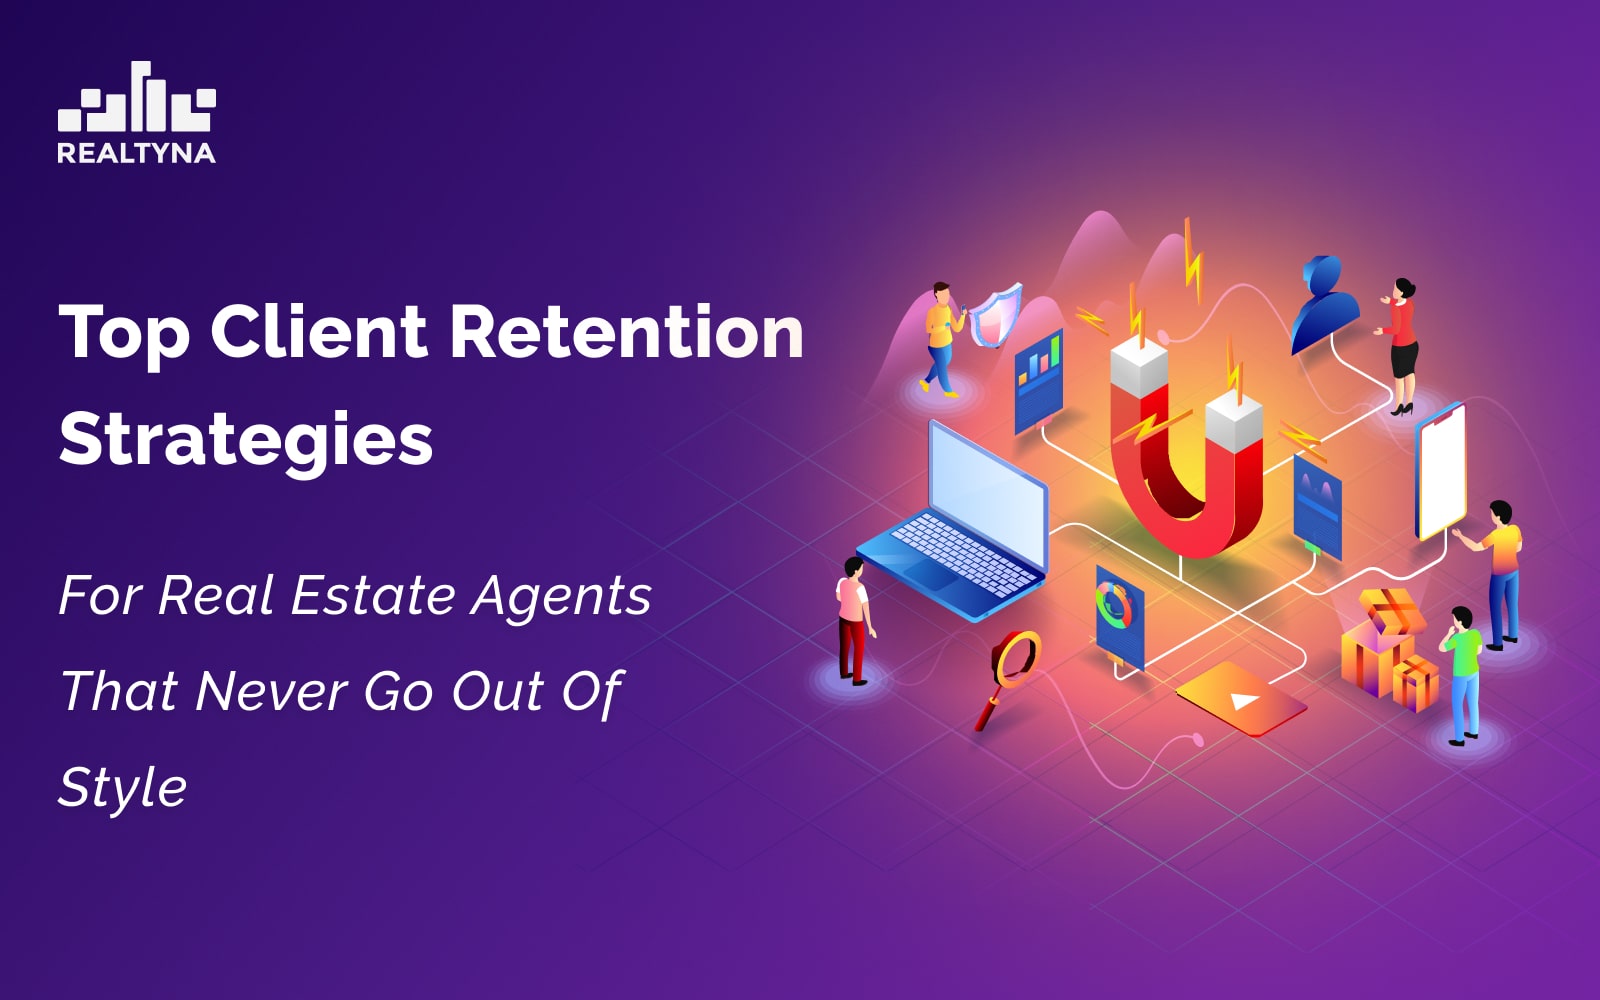 Top Client Retention Strategies for Real Estate Agents That Never Go Out of Style